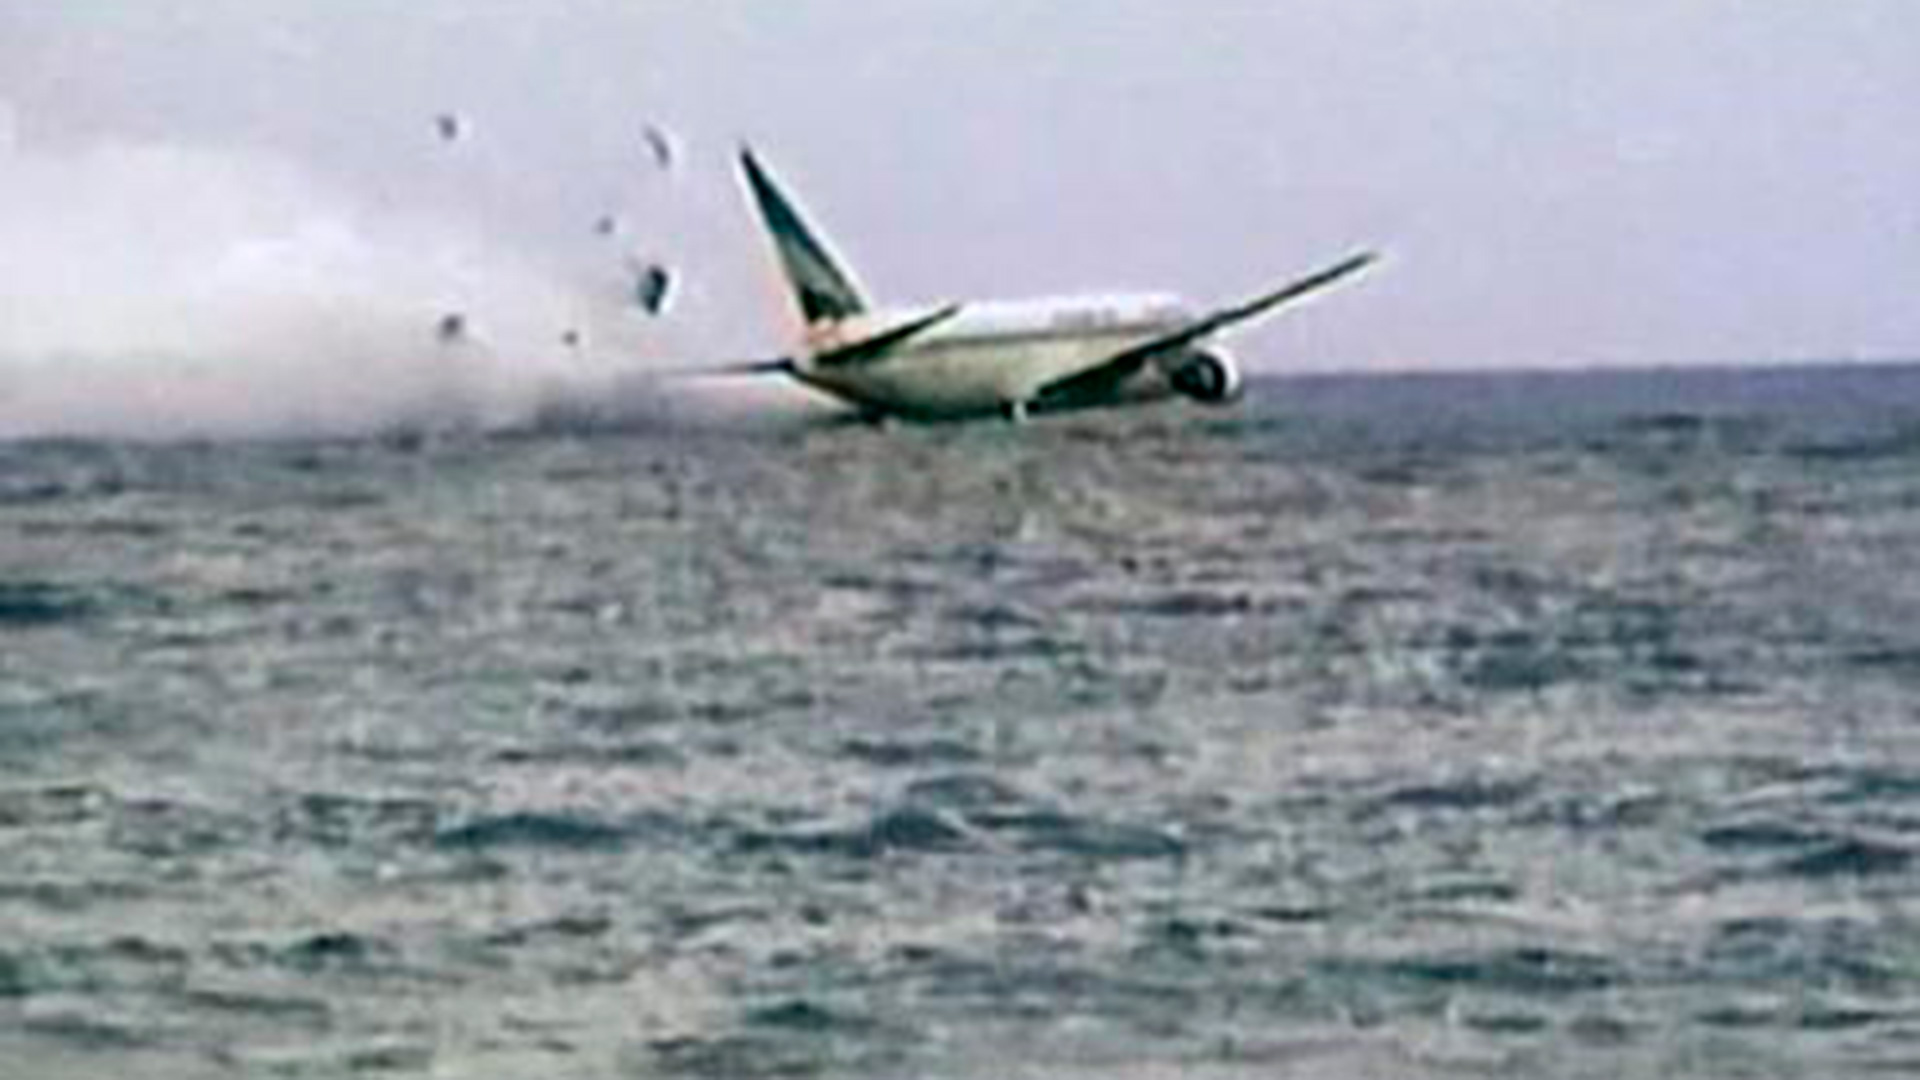 The Pilot Had To Make An Emergency Landing, Killing 125 Of The 175 People Aboard.  (Wikipedia)